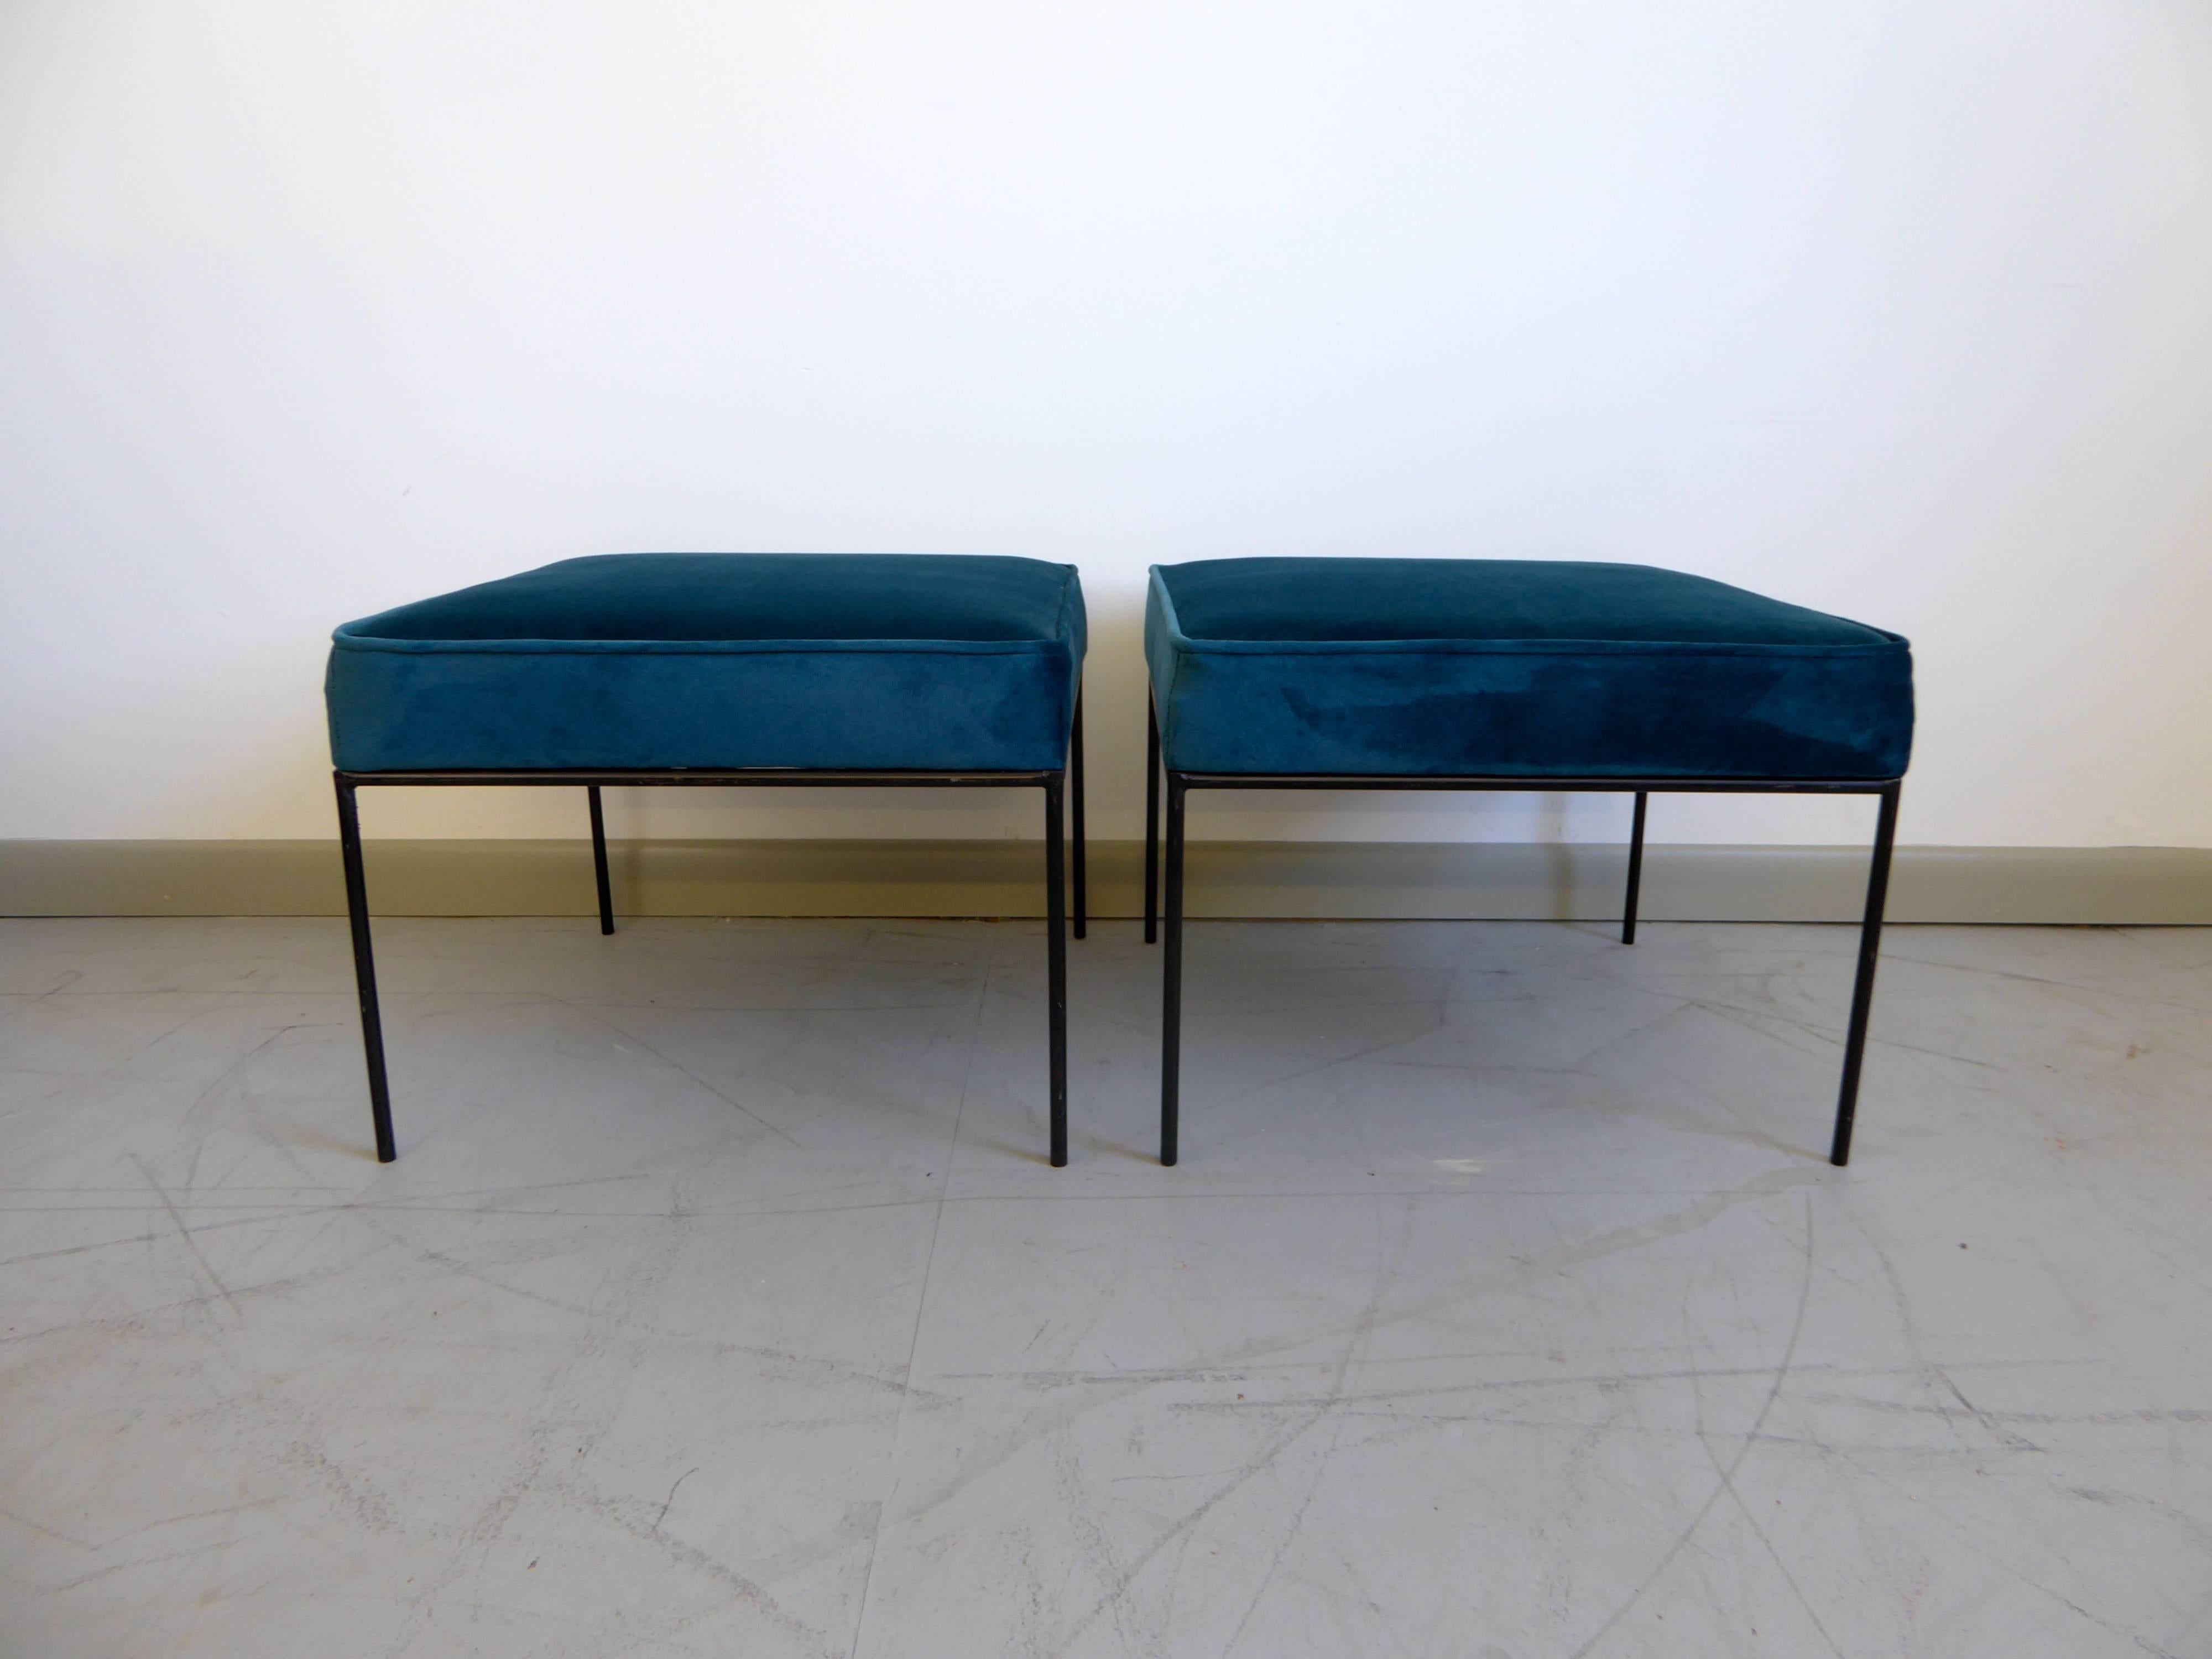 Classic square stools by Paul McCobb featuring iron bases and newly upholstered seats in a stunning peacock blue velvet.